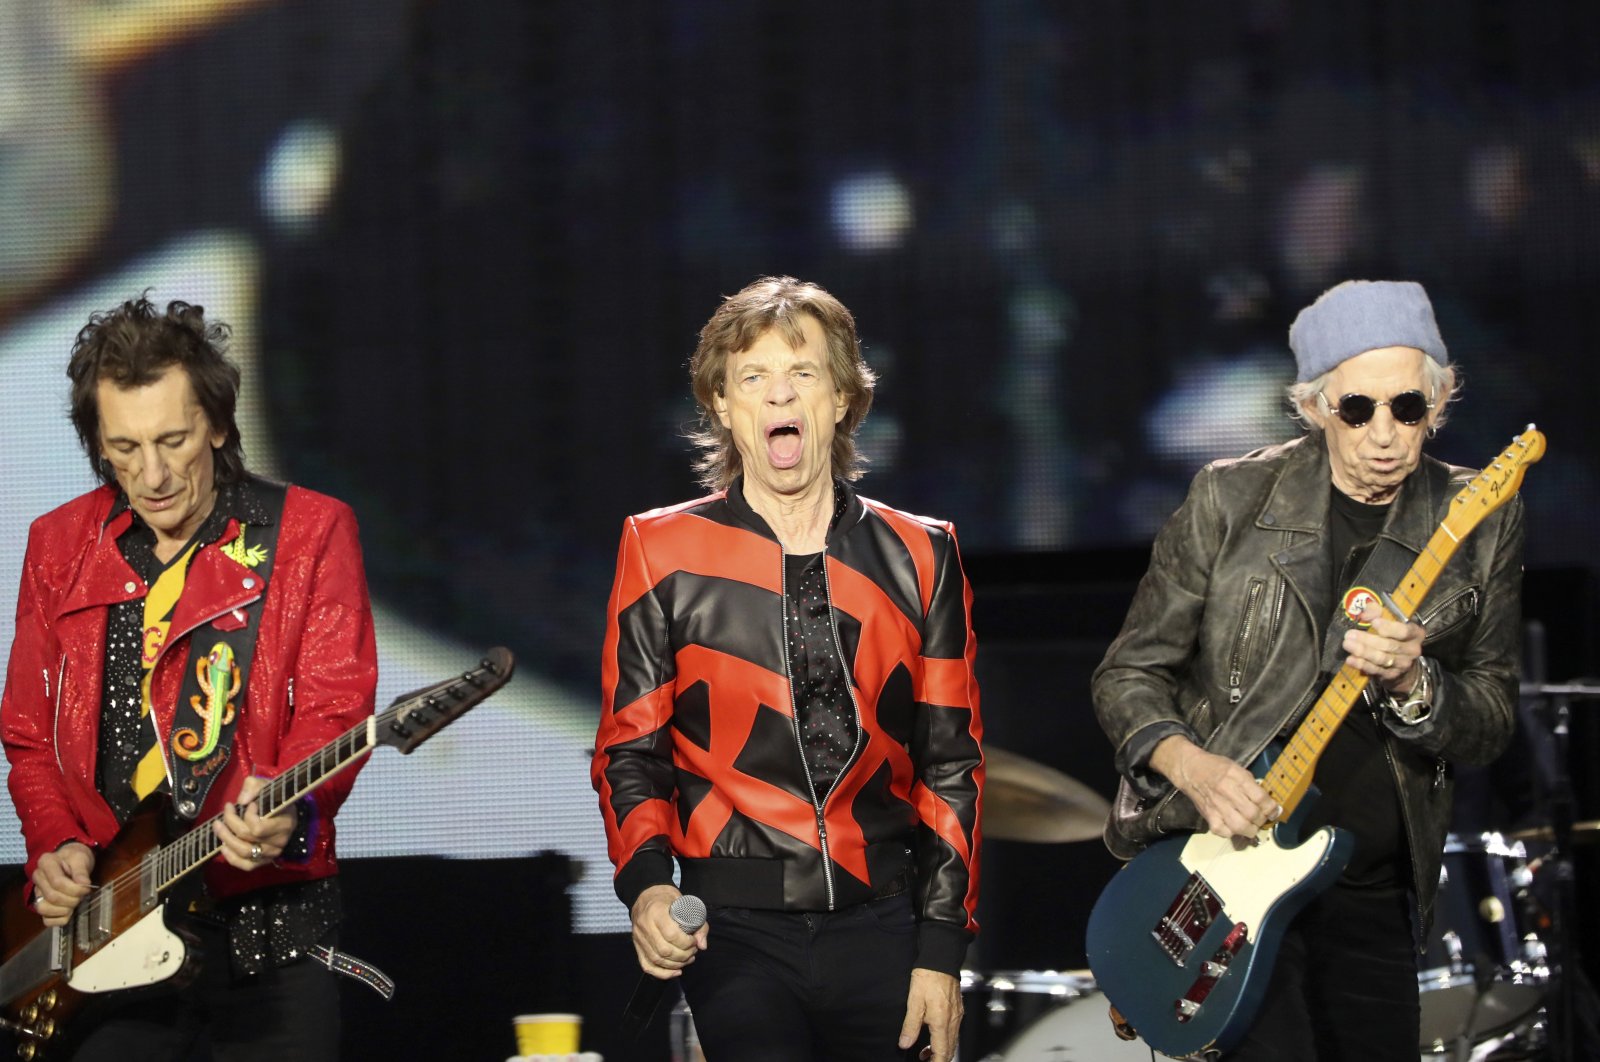 Ronnie Wood (L), Mick Jagger (C) and Keith Richards of The Rolling Stones play on stage at the Anfield Stadium in Liverpool, England, June 9, 2022. (AP)